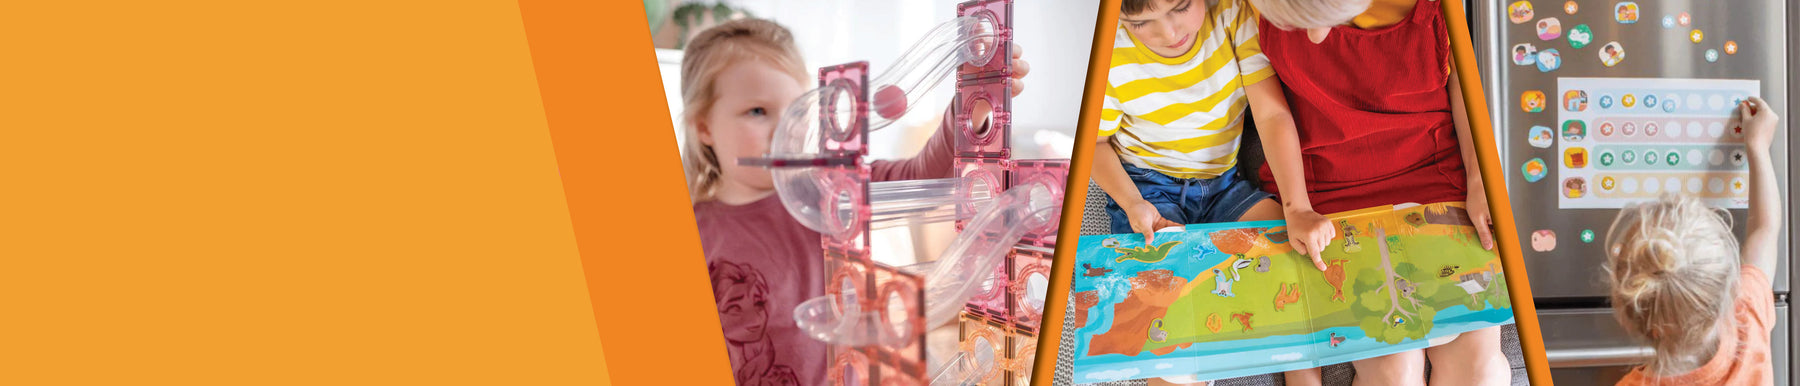 Cherrie Baby Boutique range of educational toys, and STEM toys aimed to inspire kids imaginations.